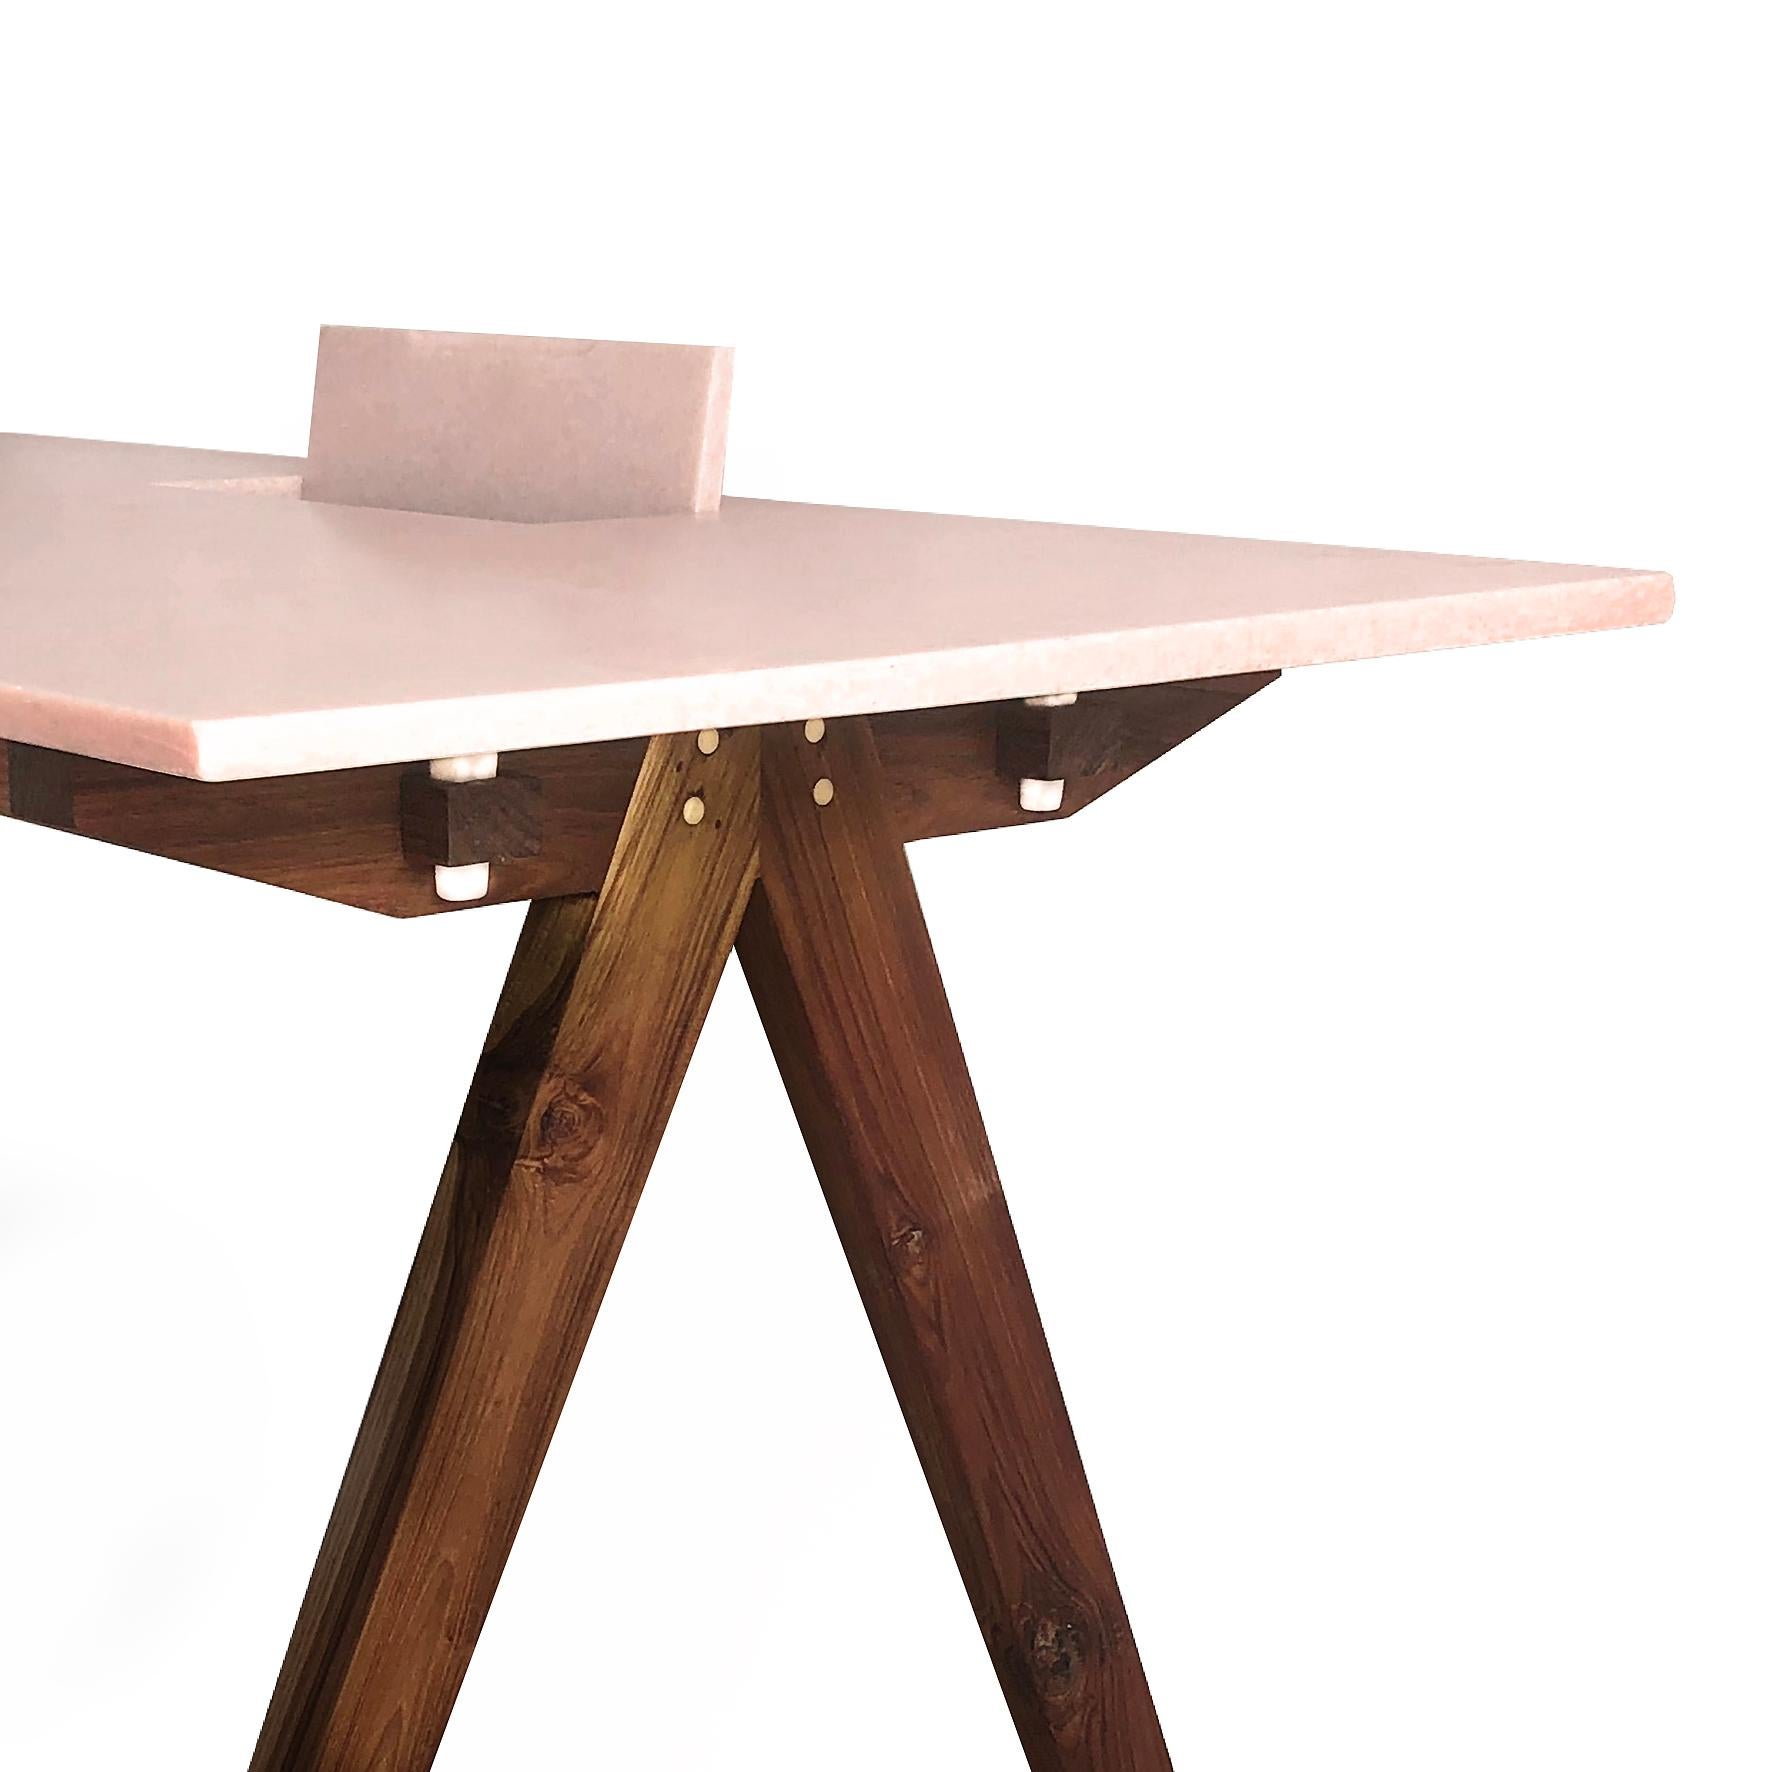 A rectangular wood and marble desk.
The tabletop is made out of Pink marble from Makrana. On a walnut rectangular support on four feet. 
The table is joined with white marble keys from Makrana and brass dowels. A hatch allows the storing of cables